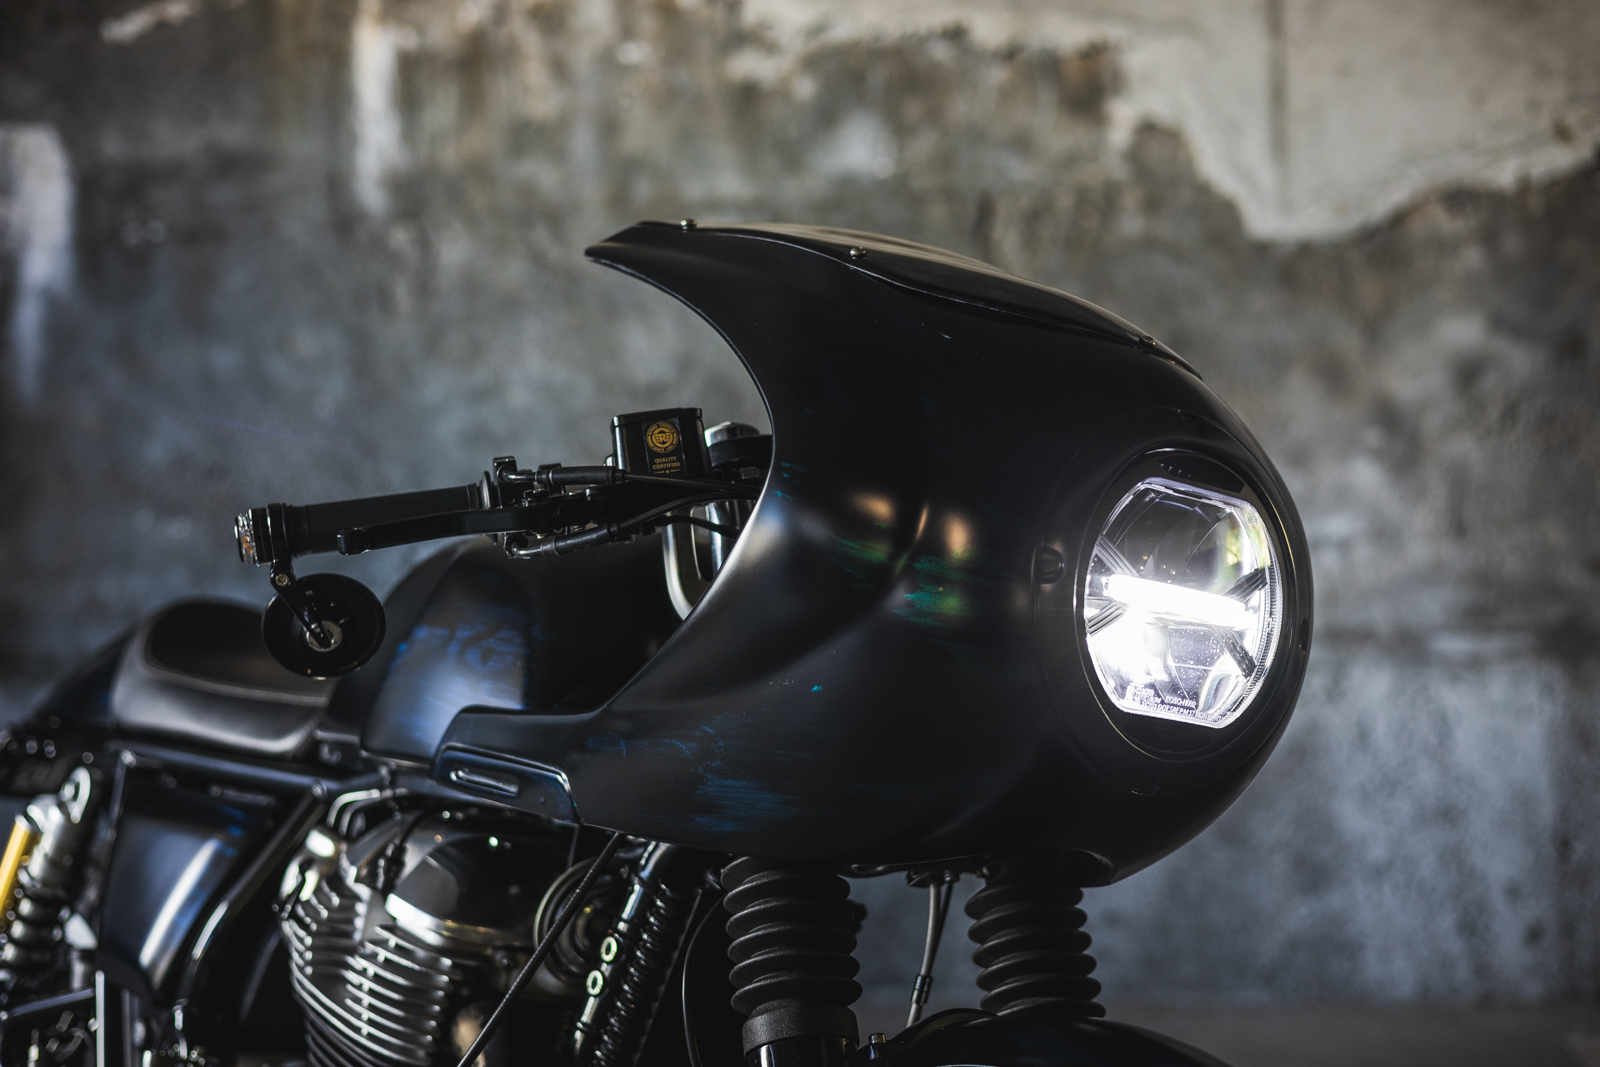 Close-up showing an Autologue Design fairing and a KOSO LED headlight for a Royal Enfield motorcycle